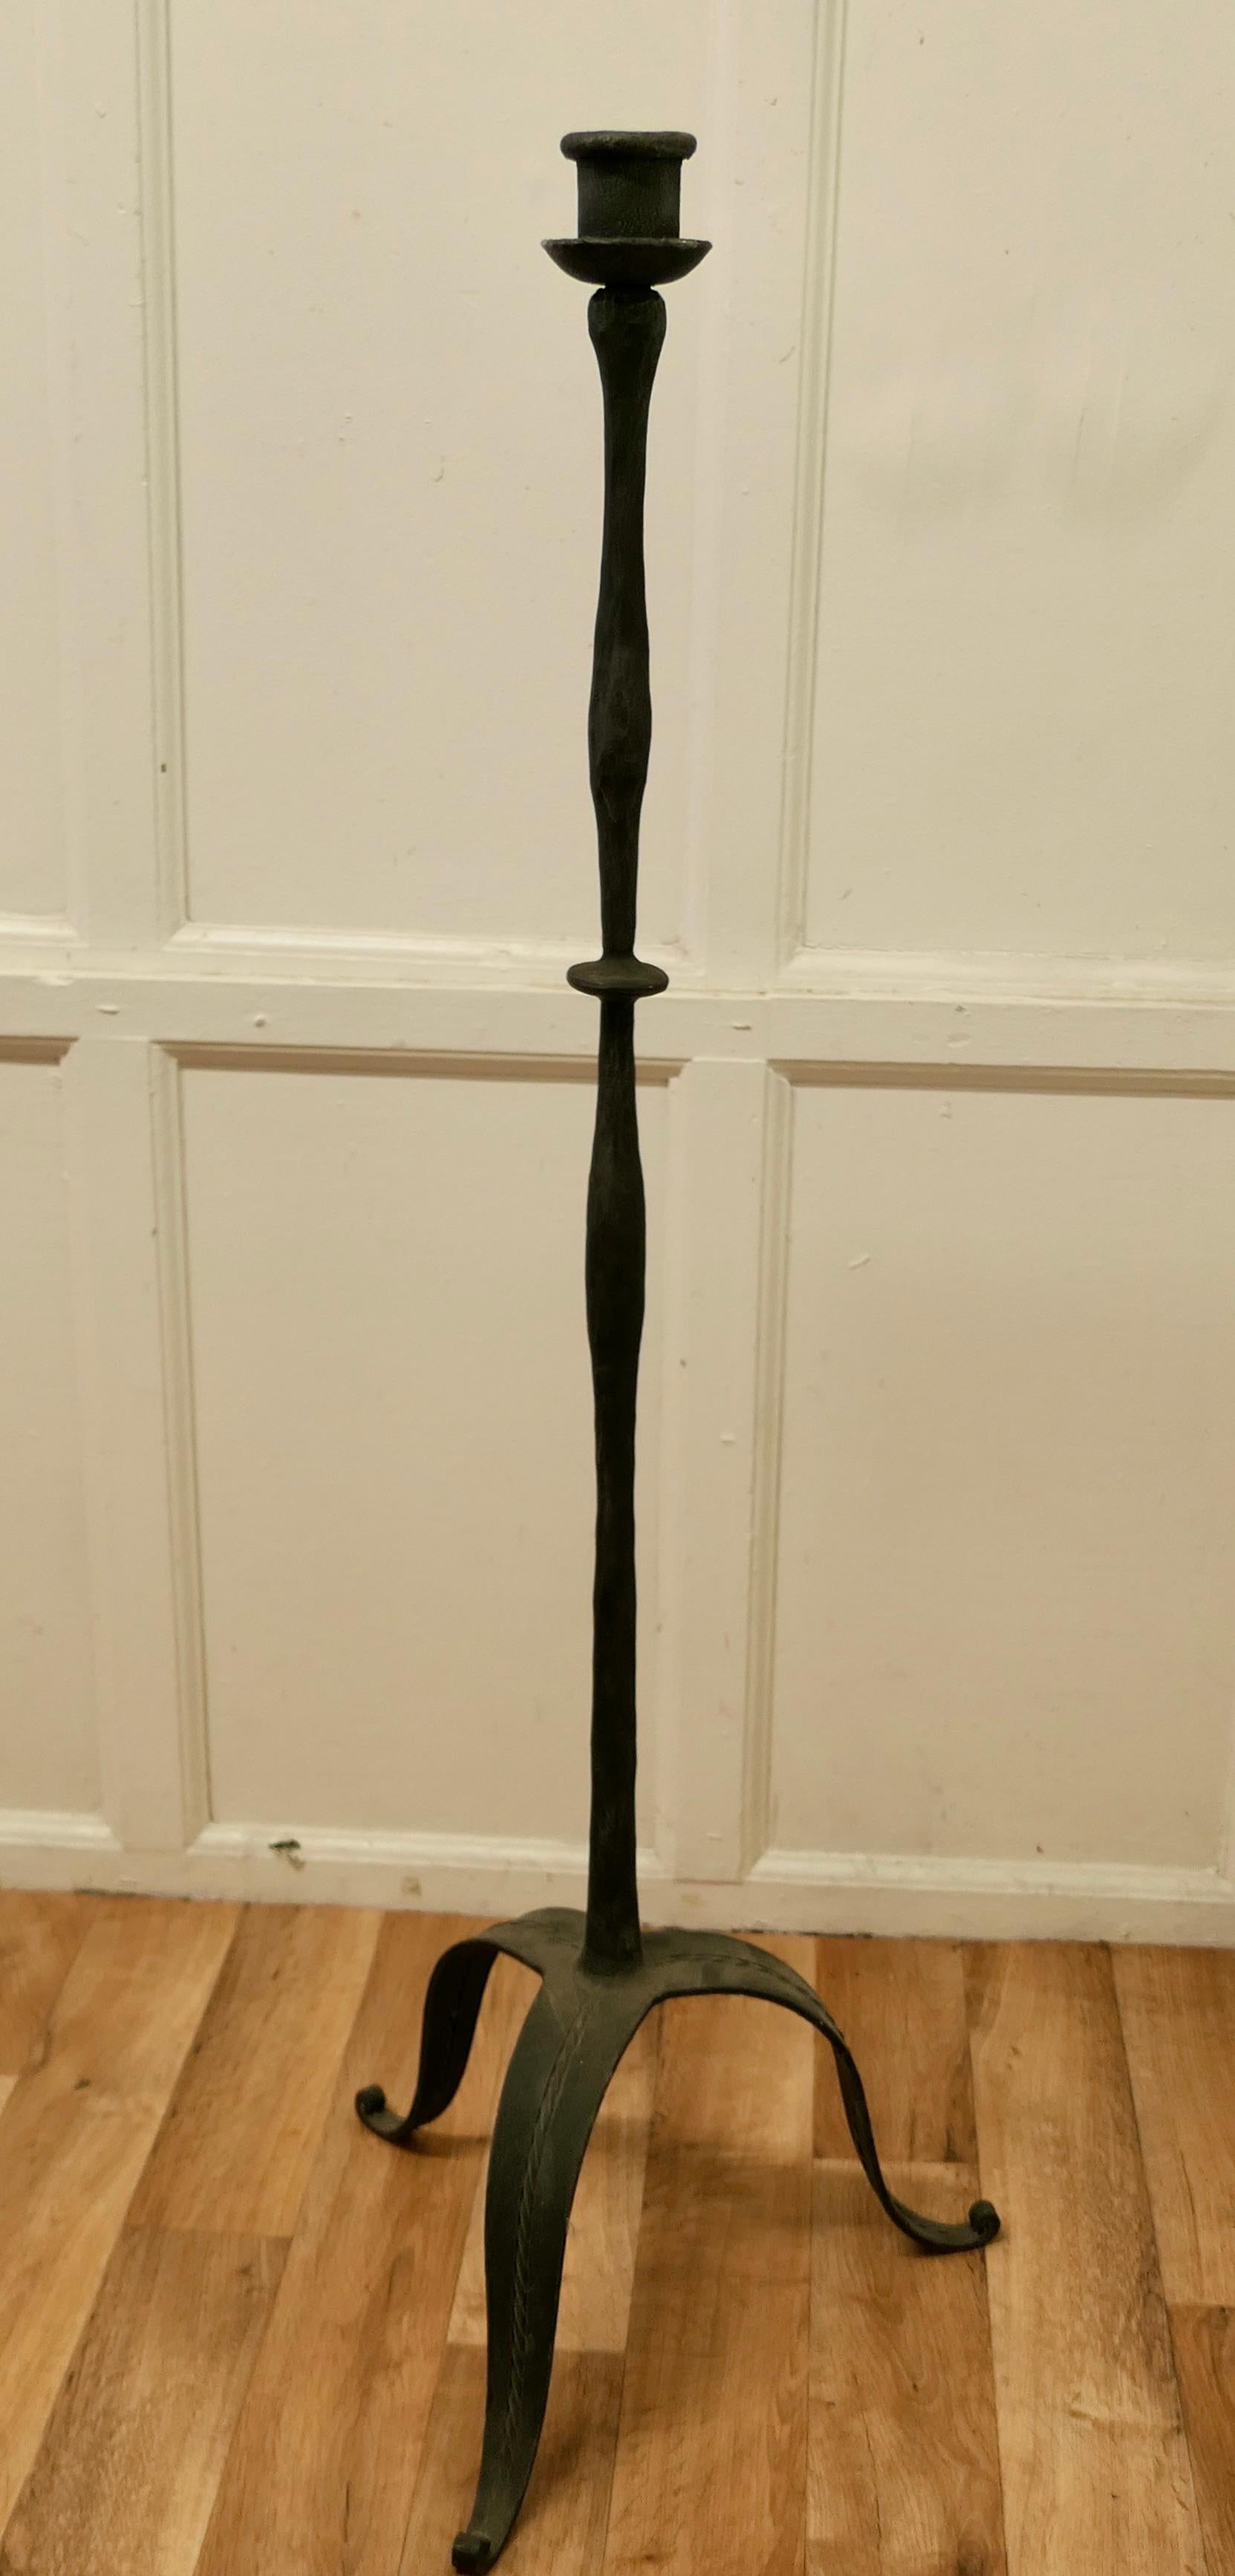 19th Century Blacksmith Made Gothic Wrought Iron Floor Lamp In Good Condition For Sale In Chillerton, Isle of Wight